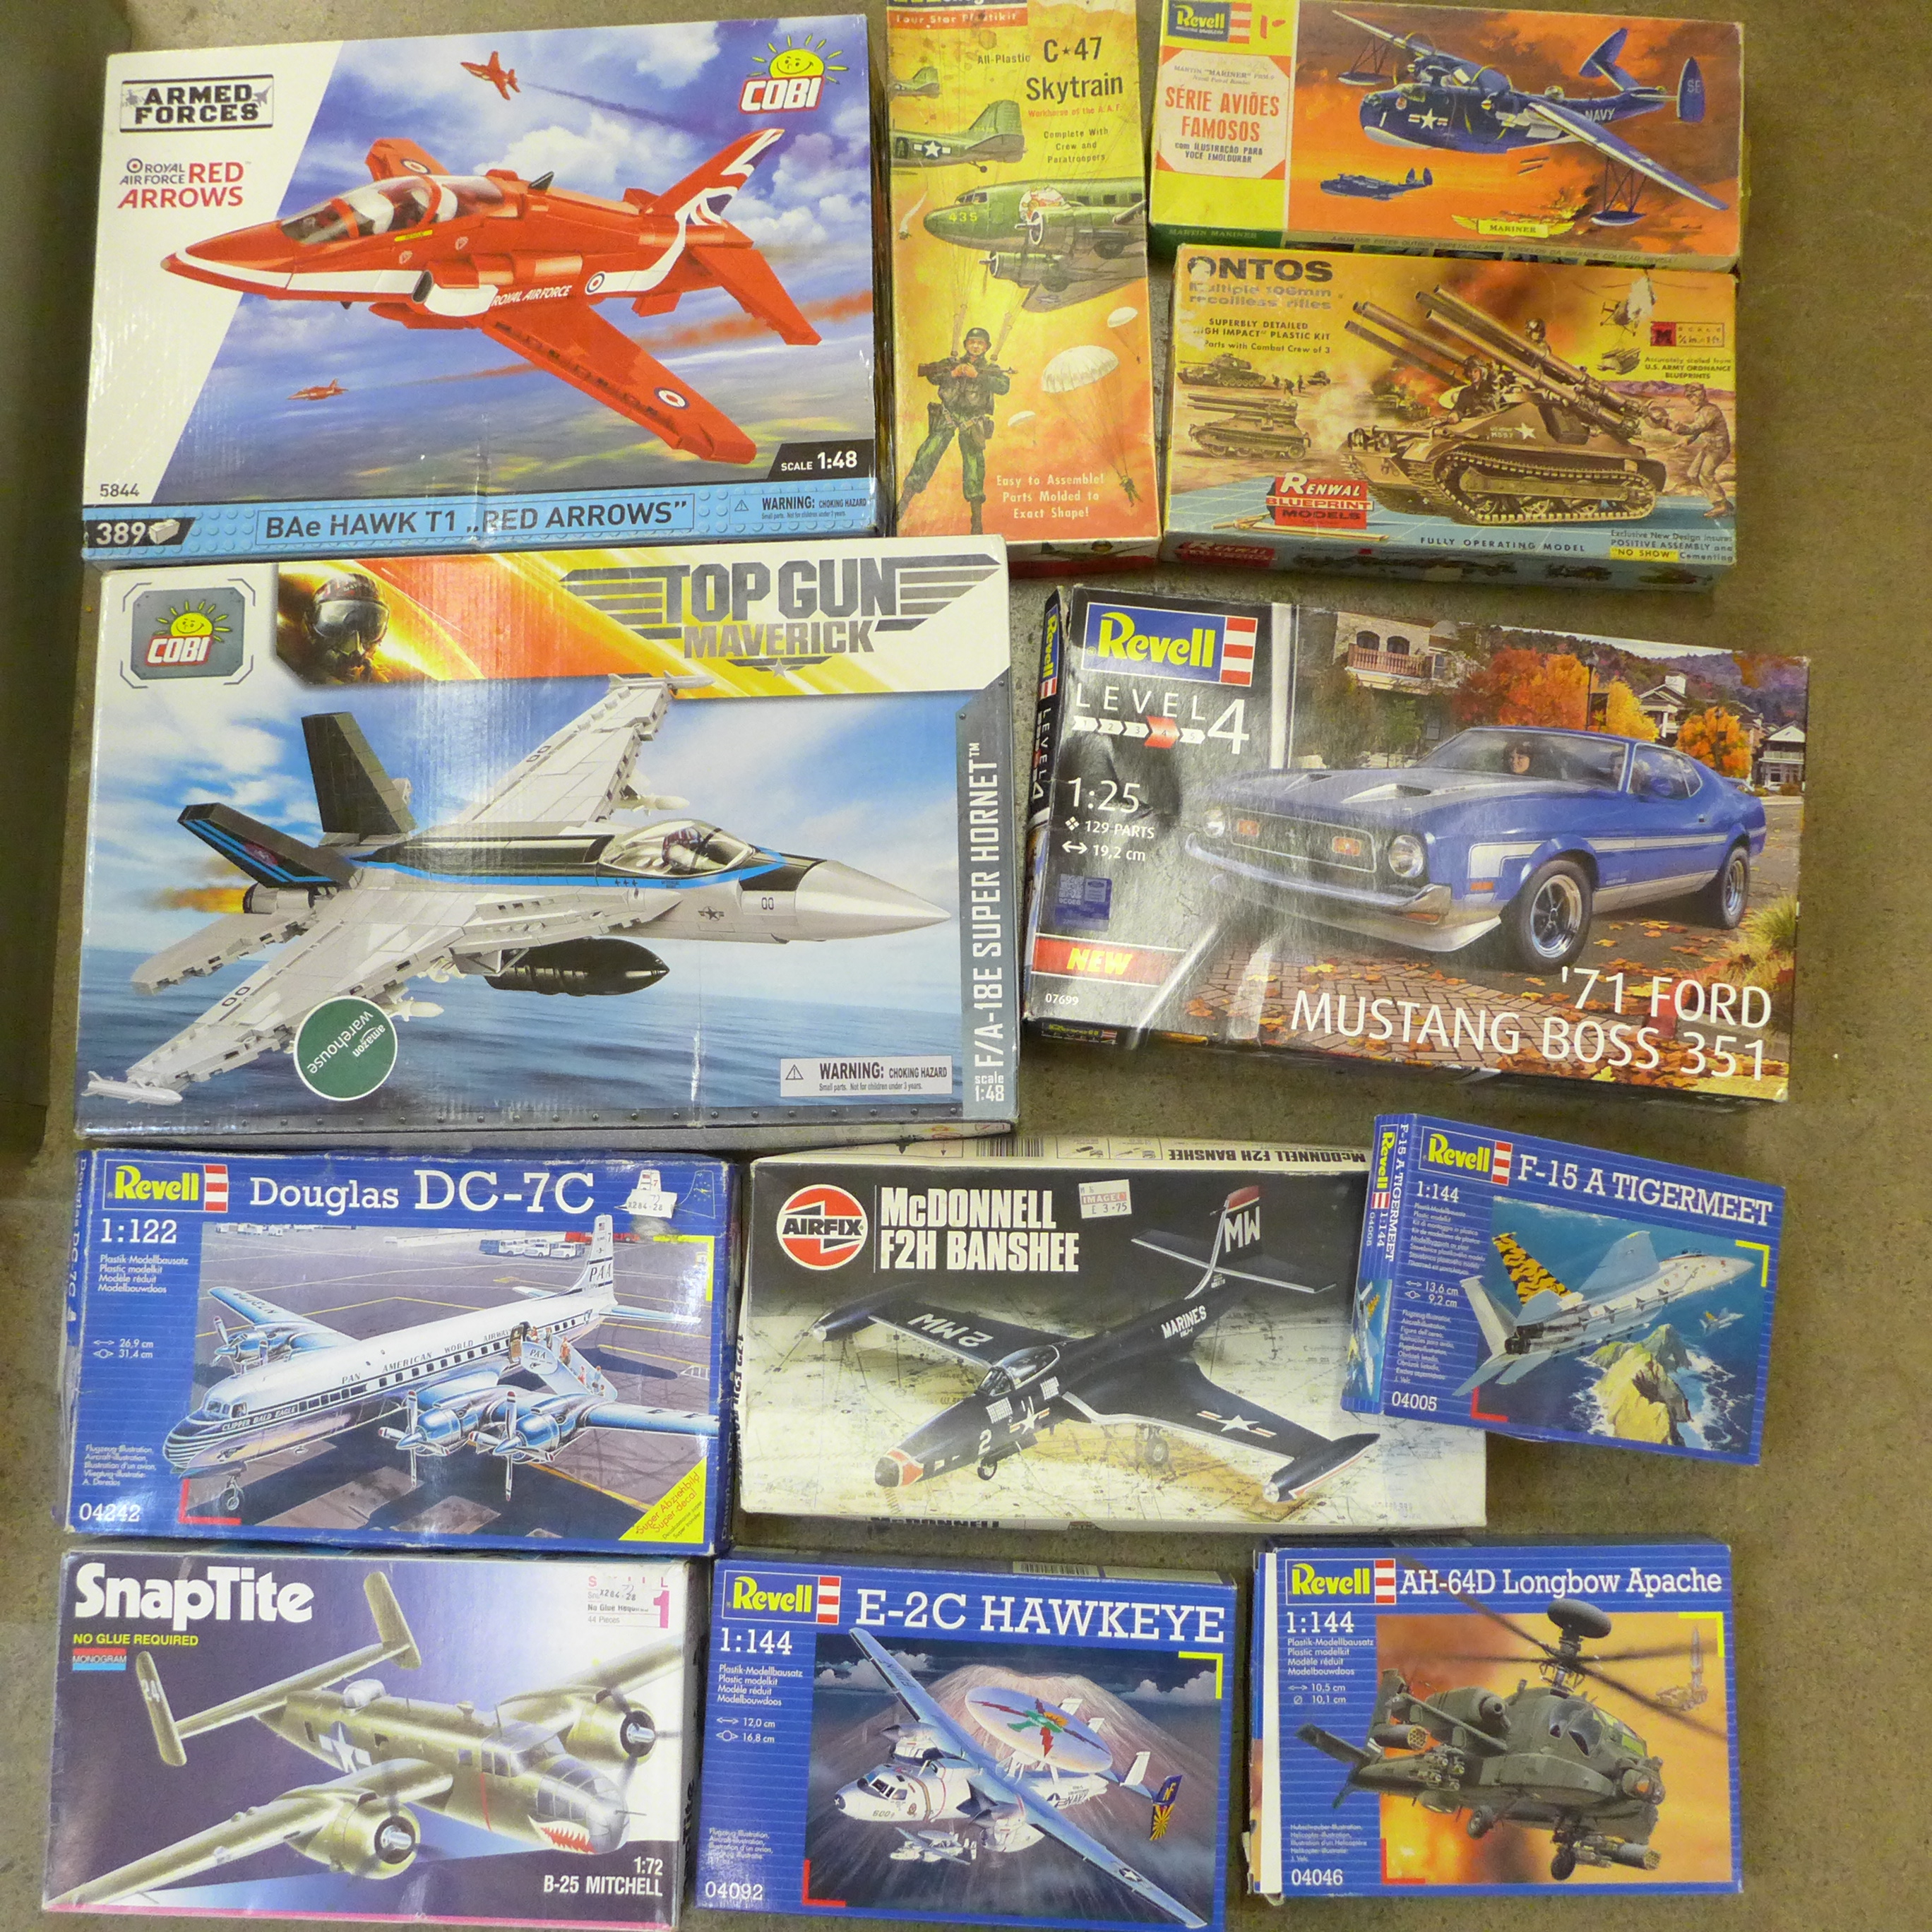 A collection of model aircraft and motor car kits, Revell, Airfix, and Monogram, etc.